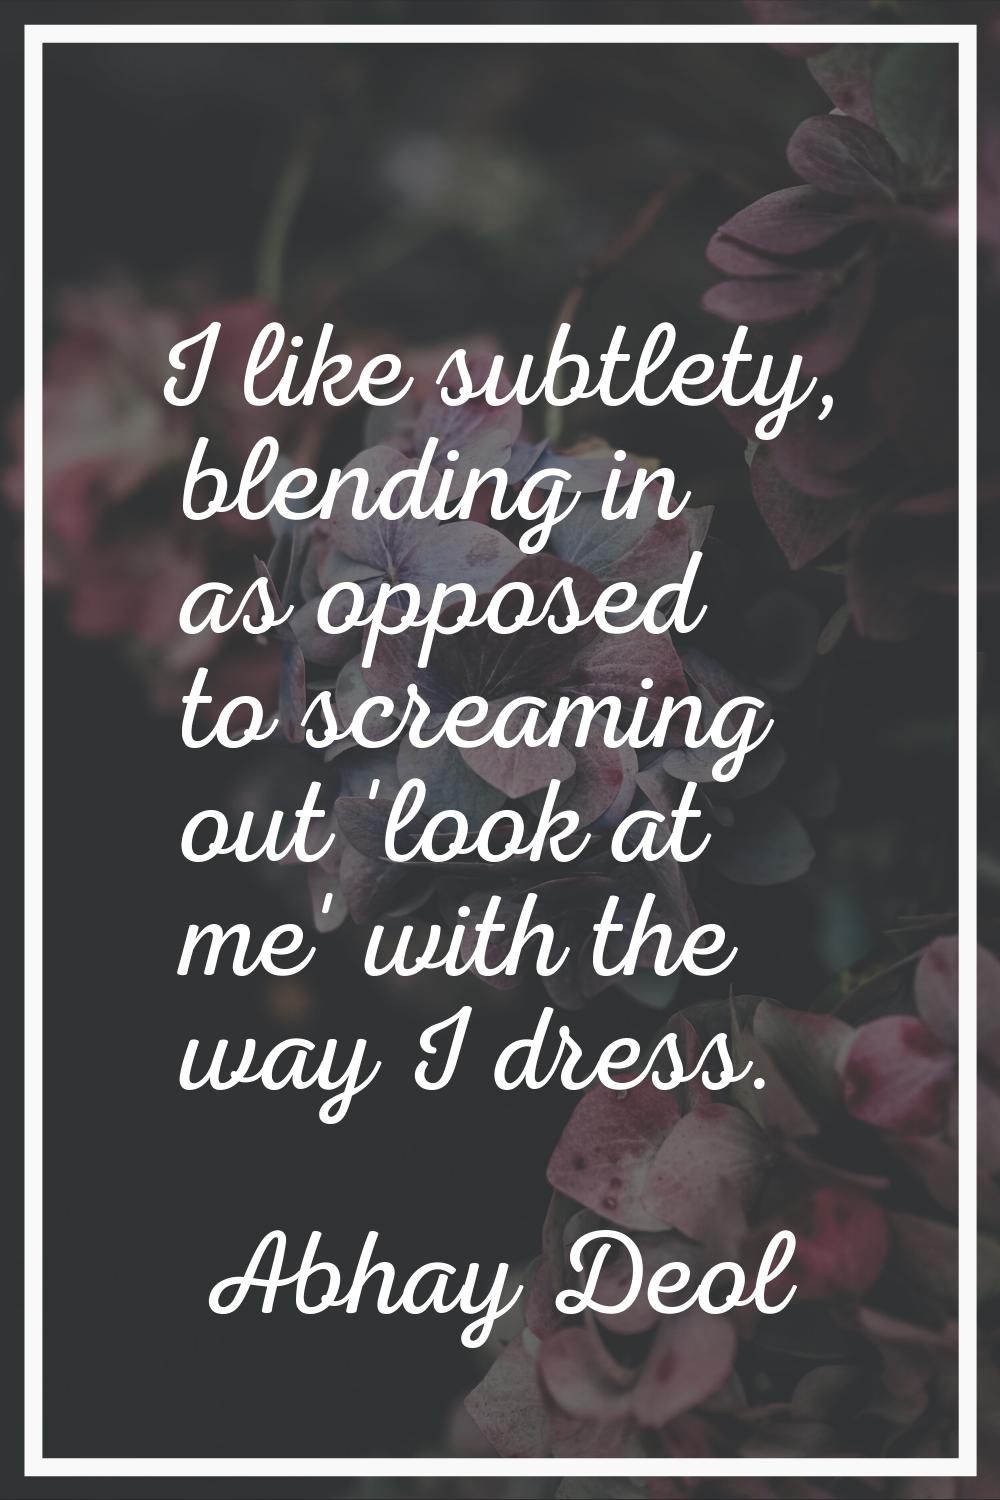 I like subtlety, blending in as opposed to screaming out 'look at me' with the way I dress.